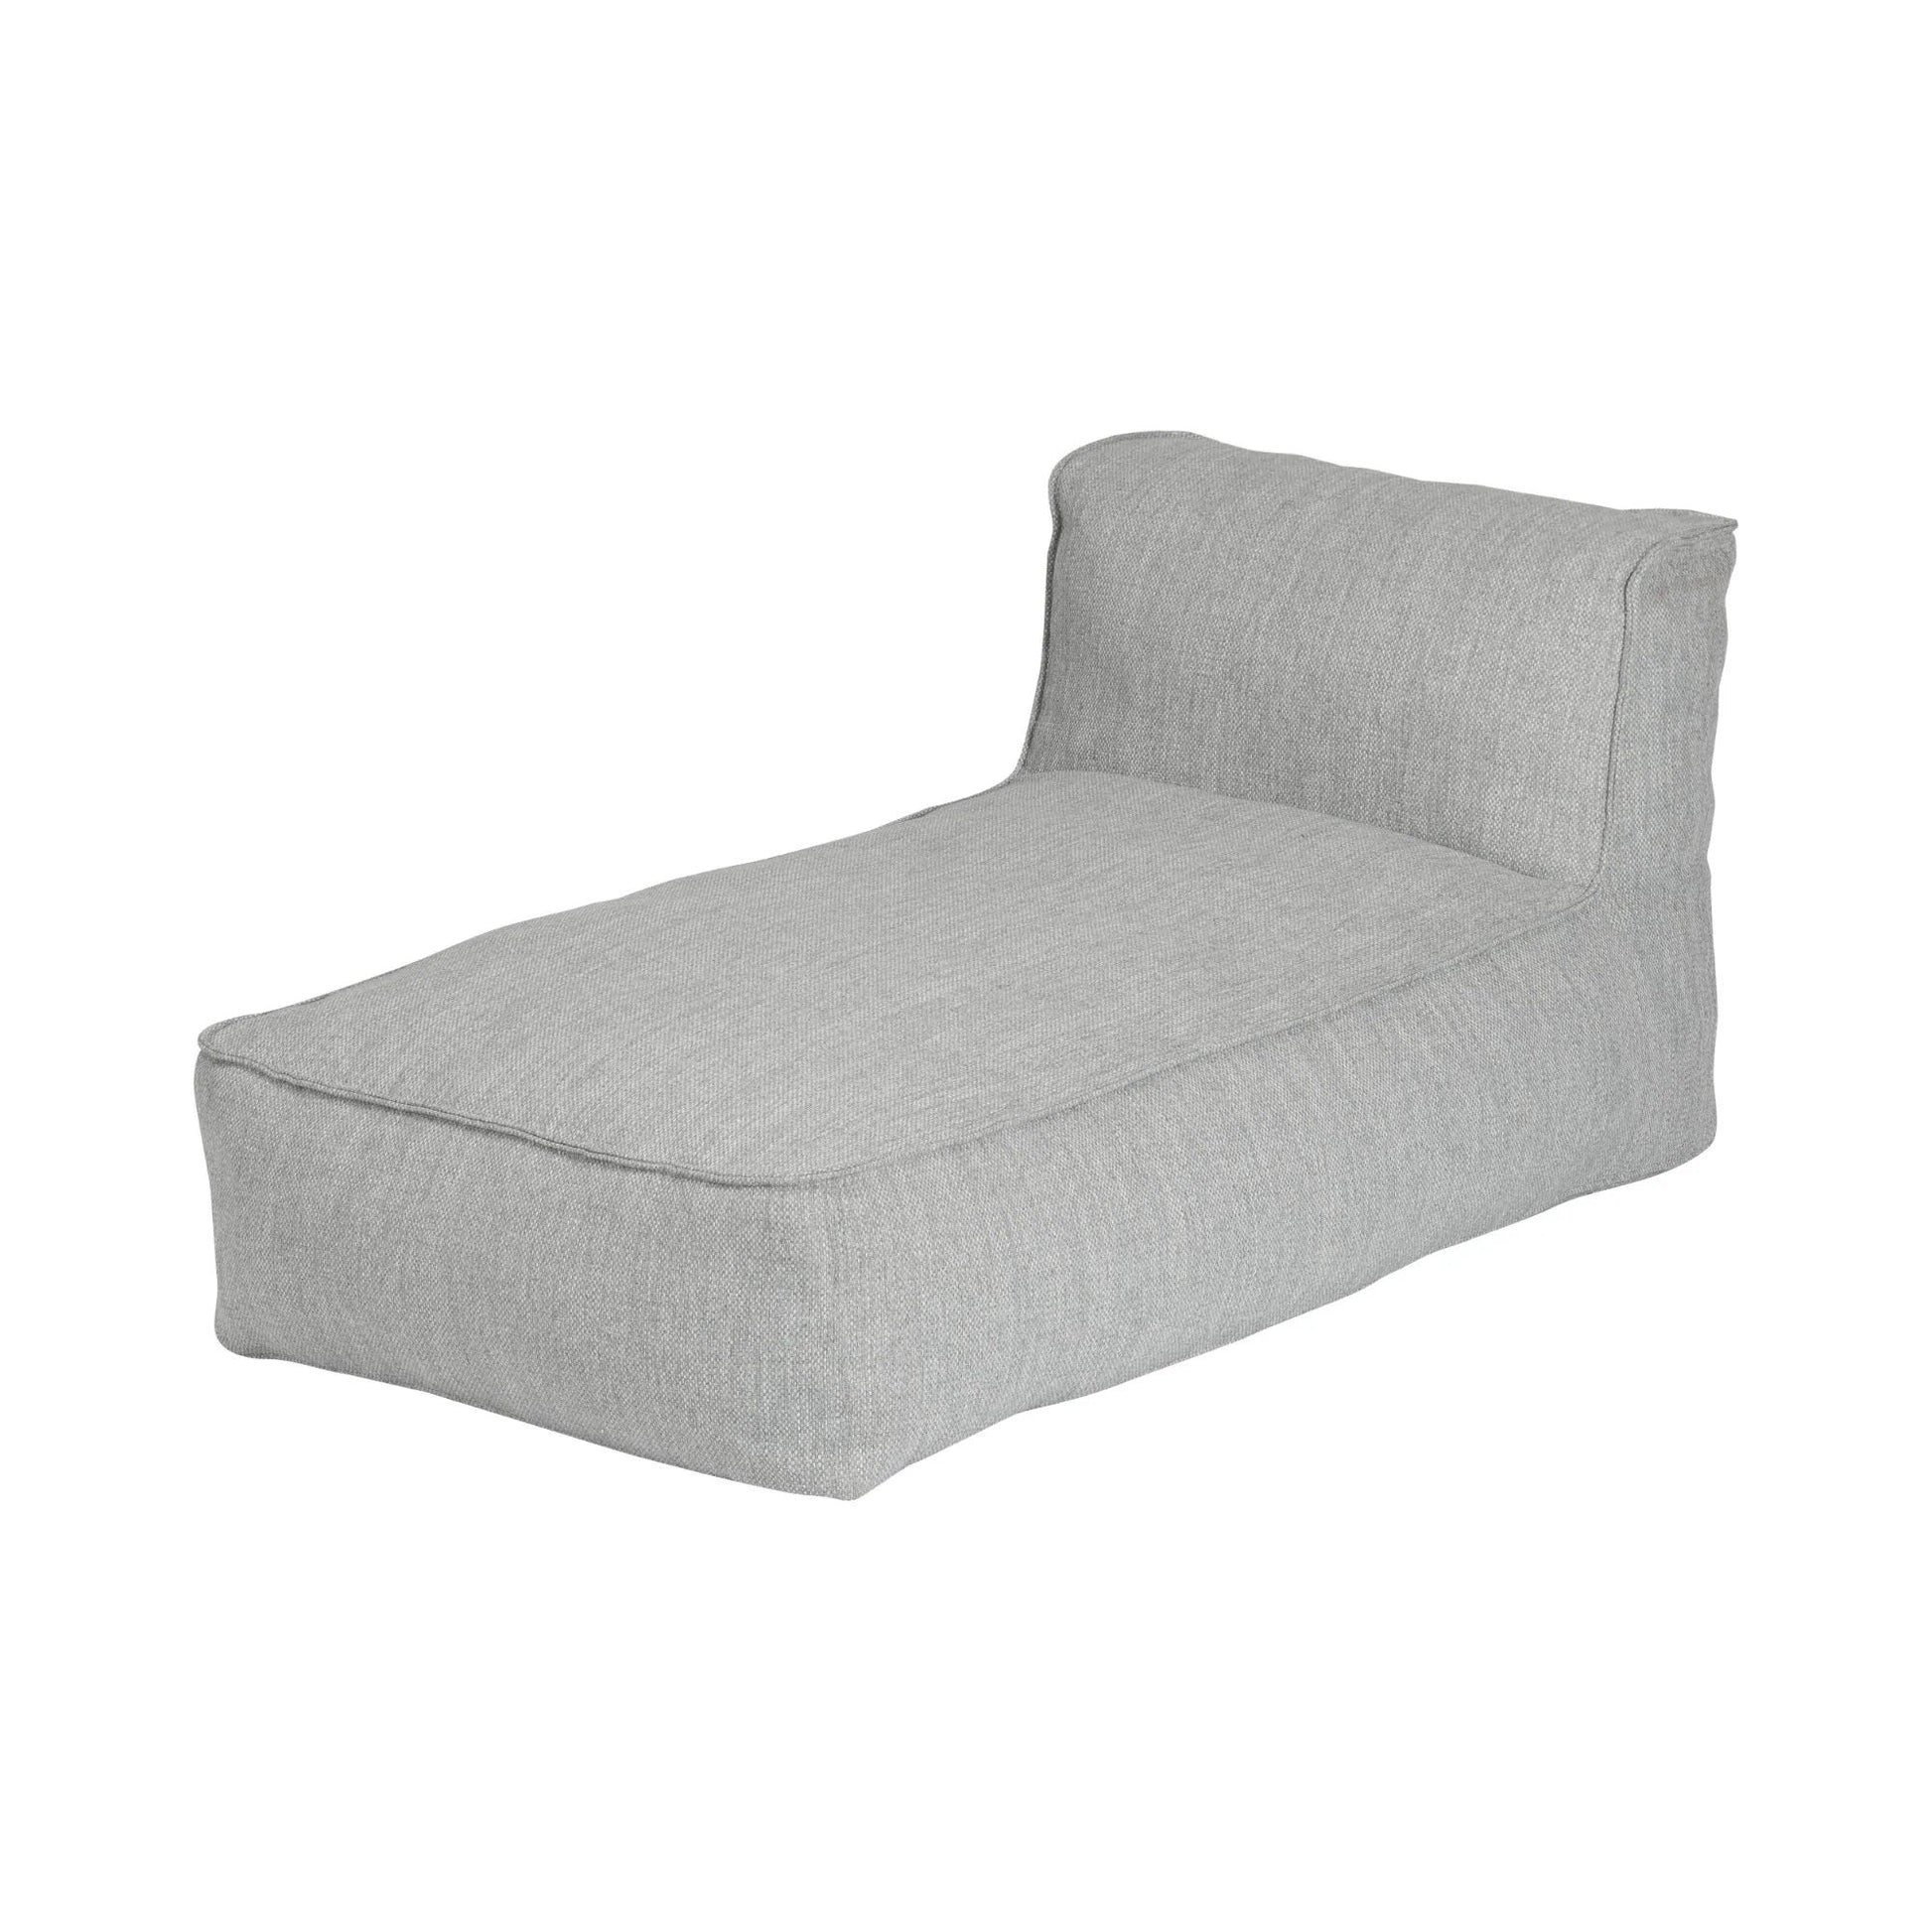 Blomus Germany Grow Chaise Sectional Outdoor Patio Lounger Cloud 62063